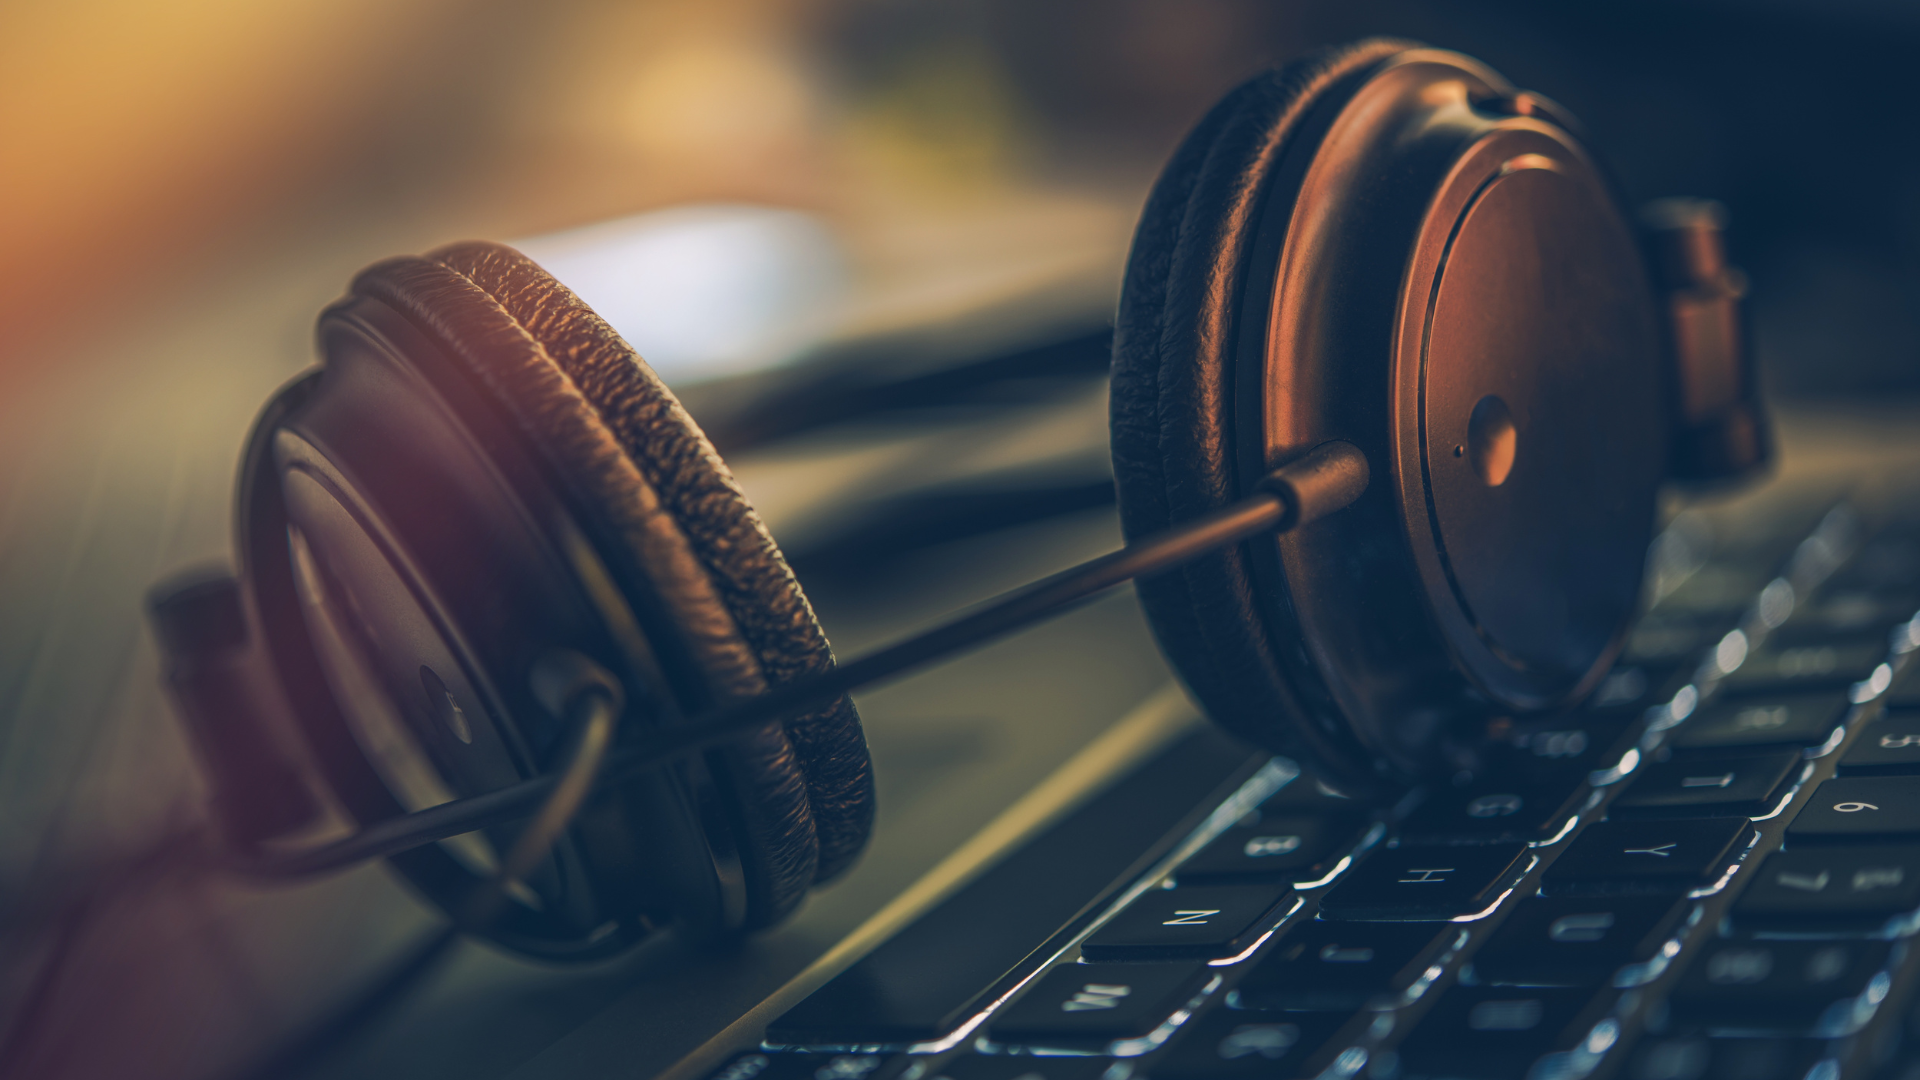 10 Best Places to Listen to Free Music Online